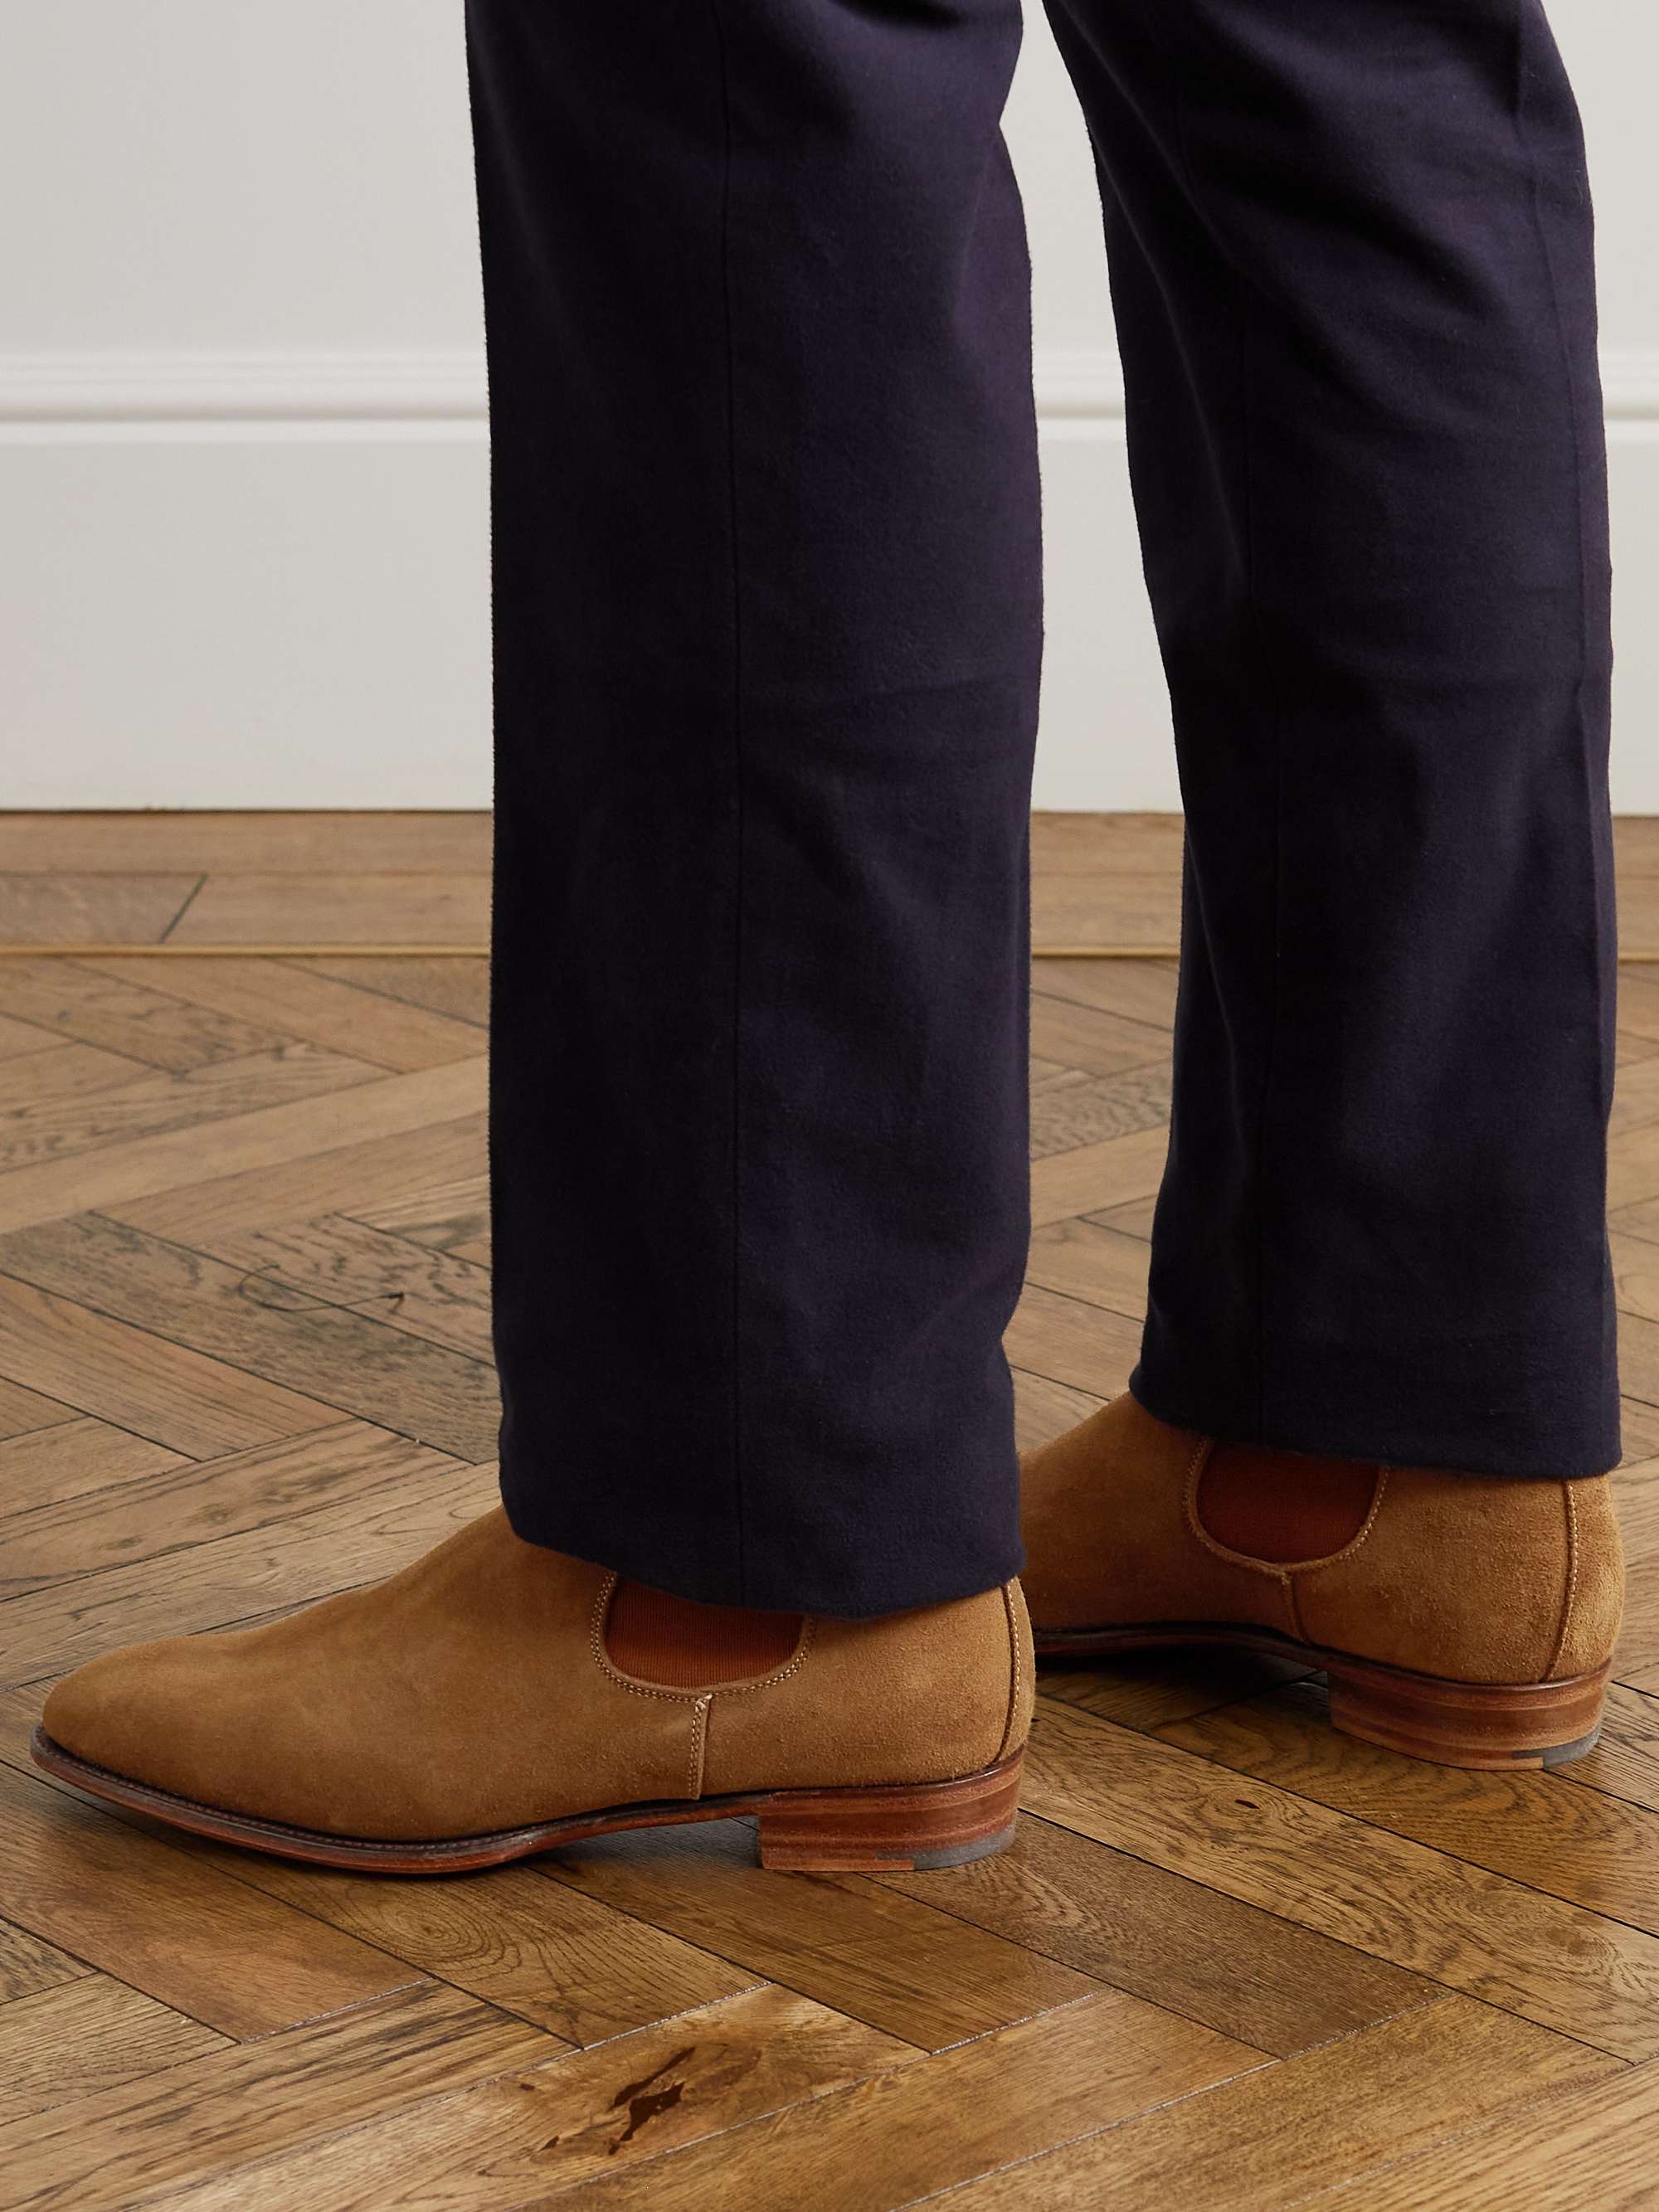 GEORGE CLEVERLEY Jason Suede Chelsea Boots